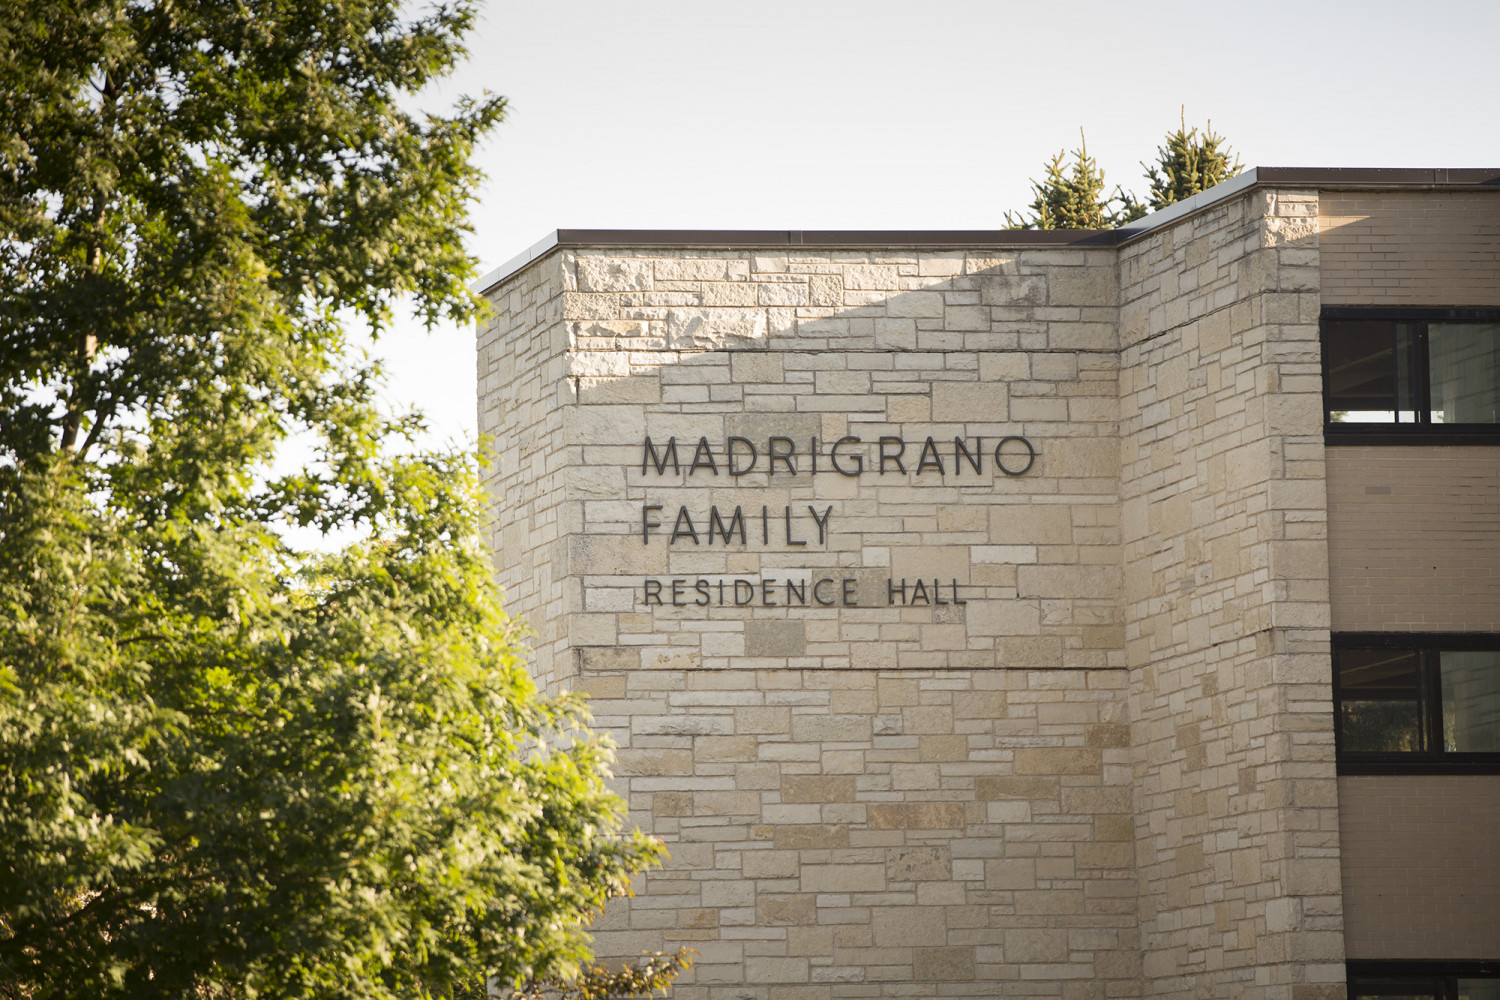 Madrigrano Family Residence Hall is a traditional, co-ed hall that is named in honor of the contr...